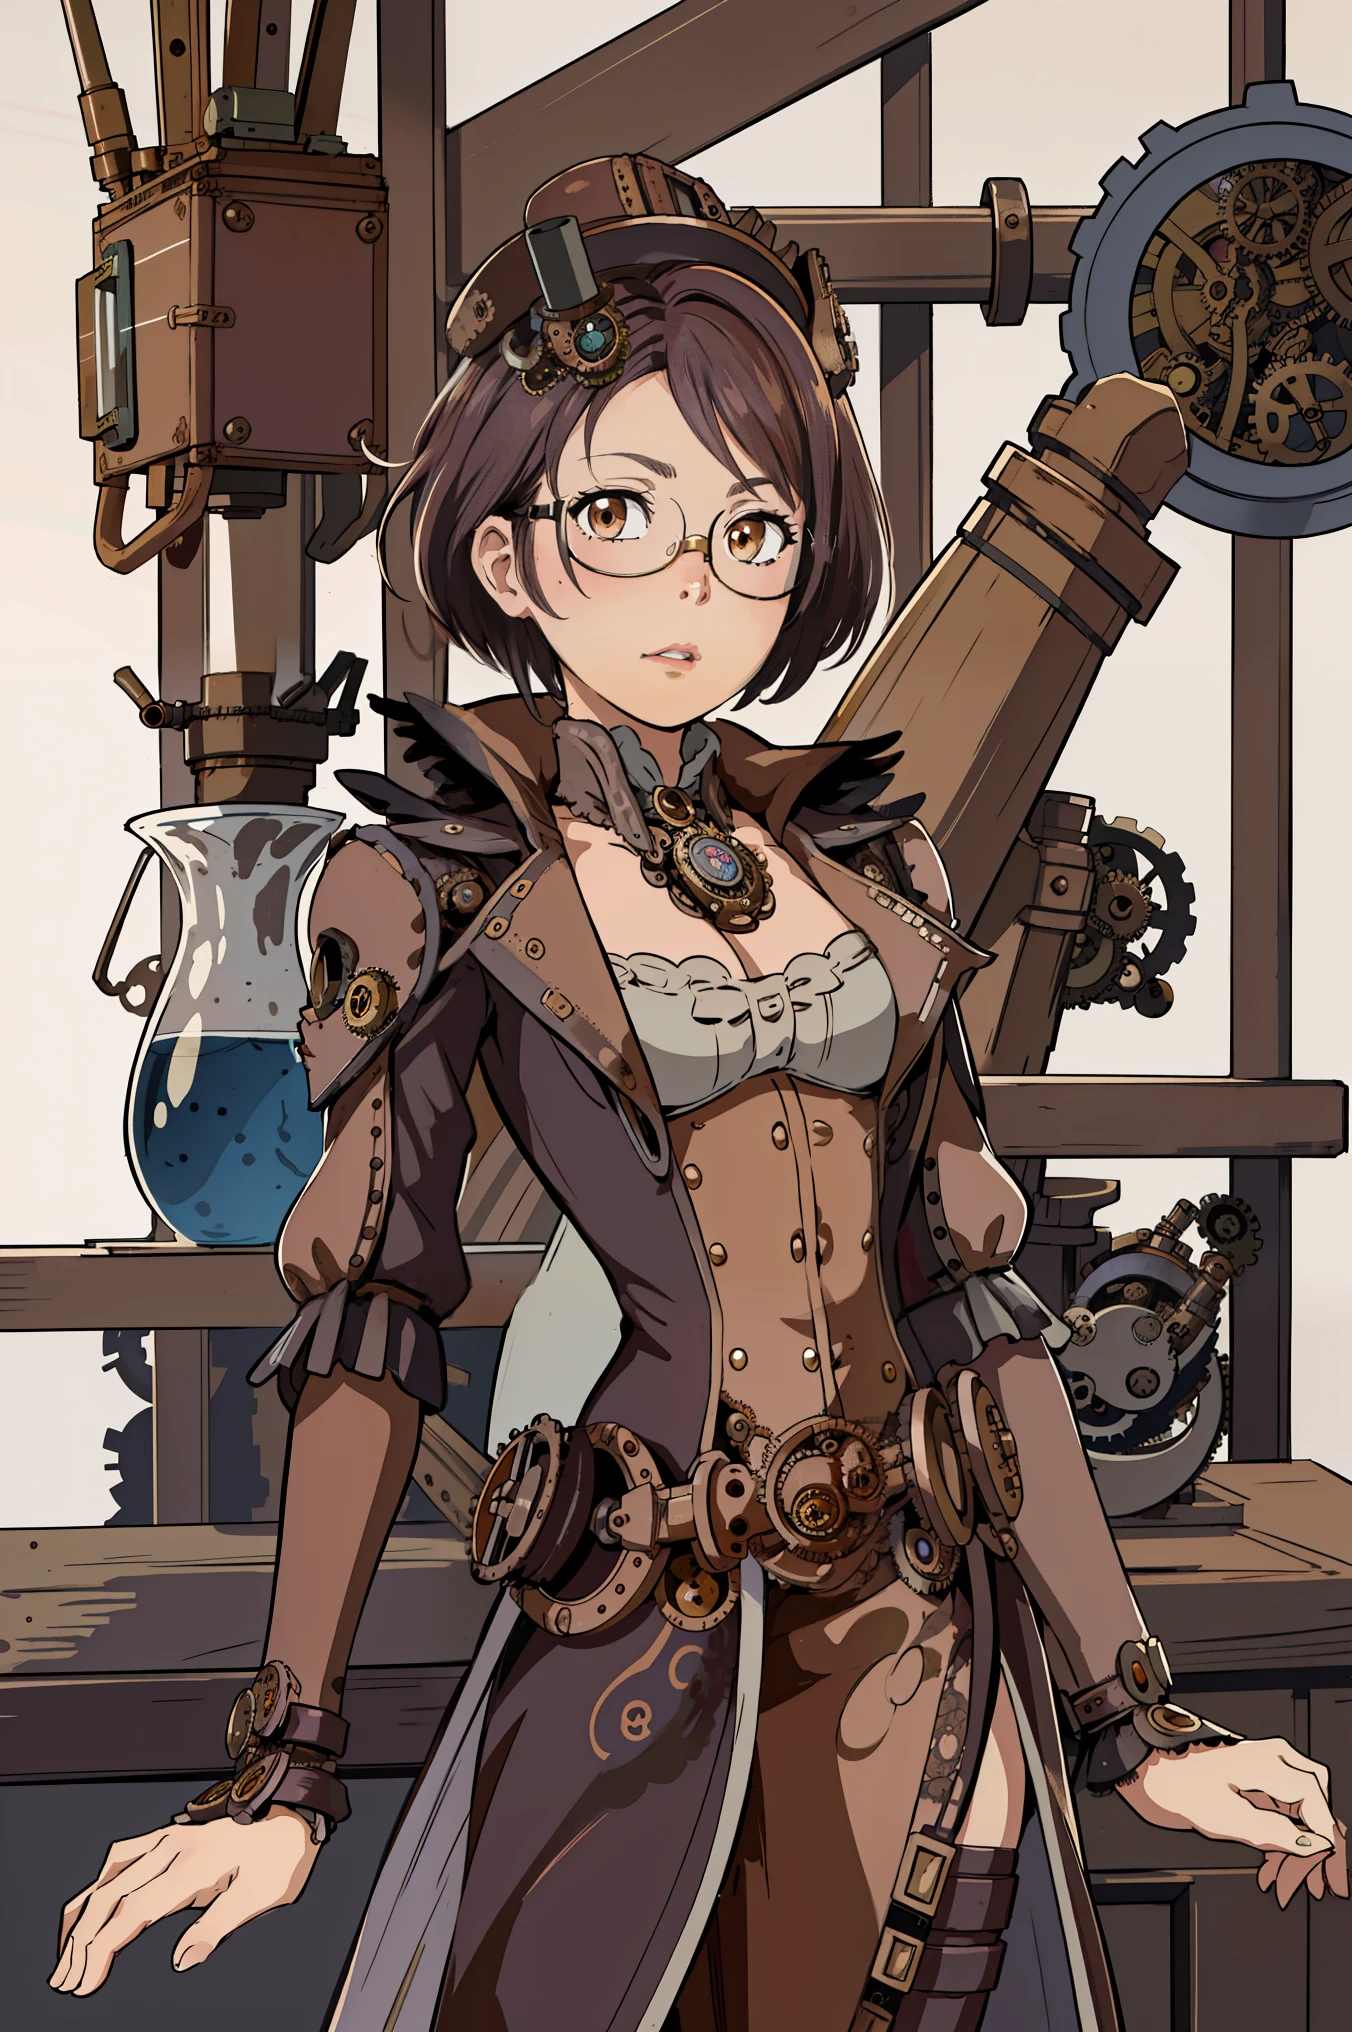 1 girl, close up, details Intricate, (Steampunk:1.4), mechanical arms, glasses, Messy hair, glasses on head, victorian dress, (art nouveau), gears Steampunk, gears, machinery